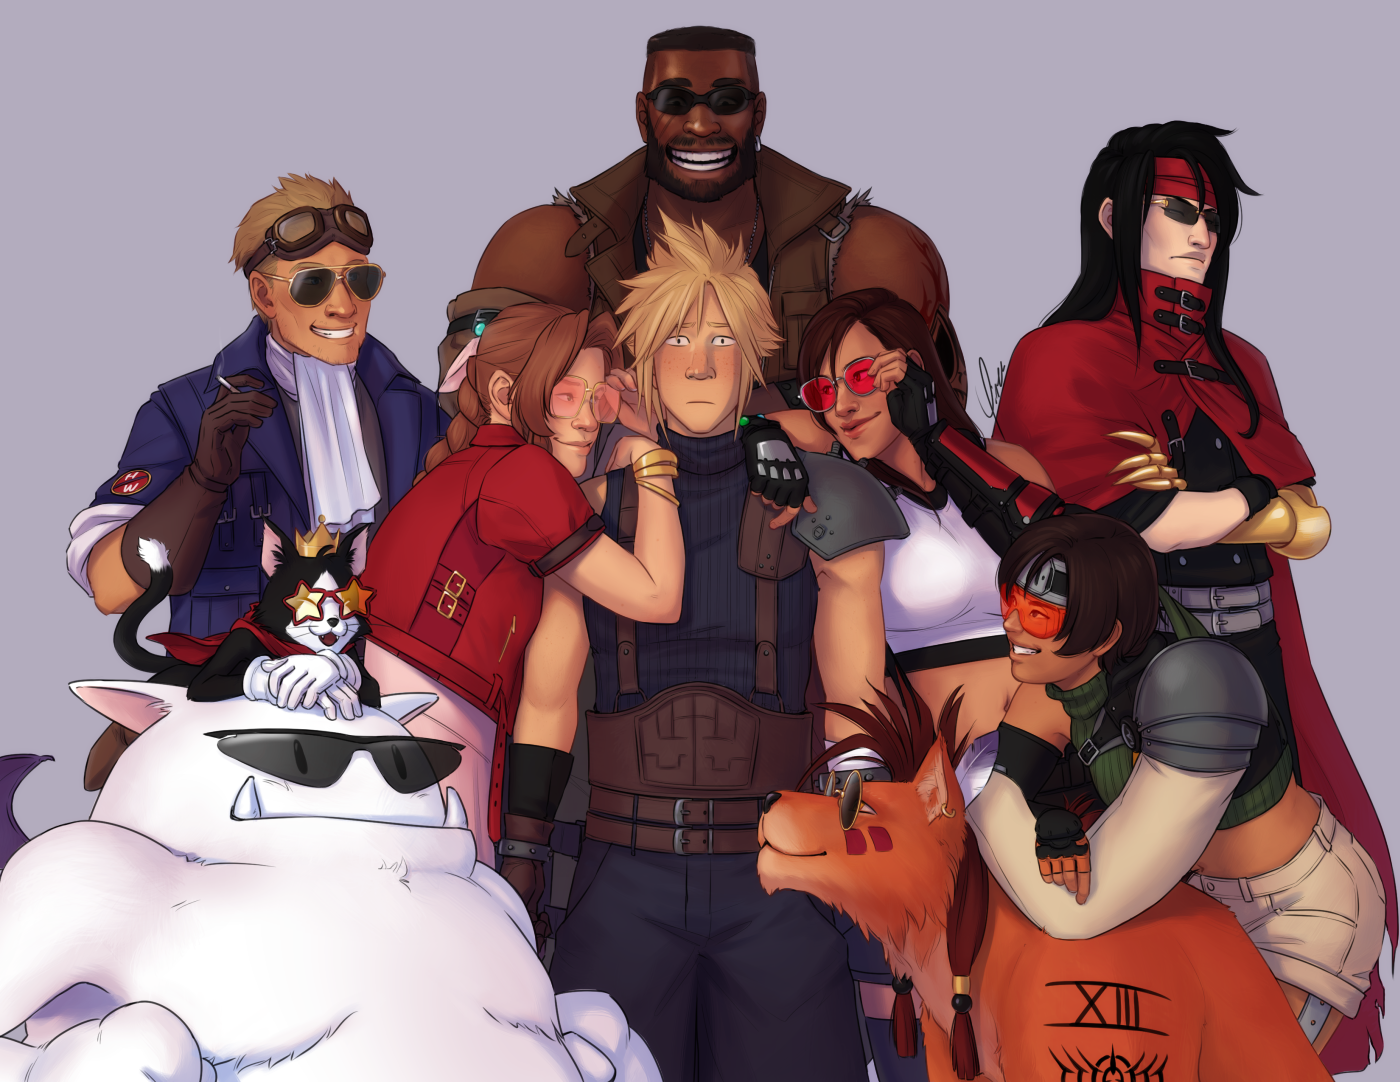 Digital fanart of Final Fantasy VII's playable characters. Cloud stands awkwardly in the center, blushing, the only one not wearing sunglasses. Aeris and Tifa are leaning on either shoulder, grinning at him. Cid stands behind Aeris, and Cait Sith in front of her, and even Mog is wearing sunglasses. Vincent stands behind Tifa, while Yuffie leans down in front with her arms across Nanaki's back. Barret stands directly behind Cloud, grinning down at him delightedly.